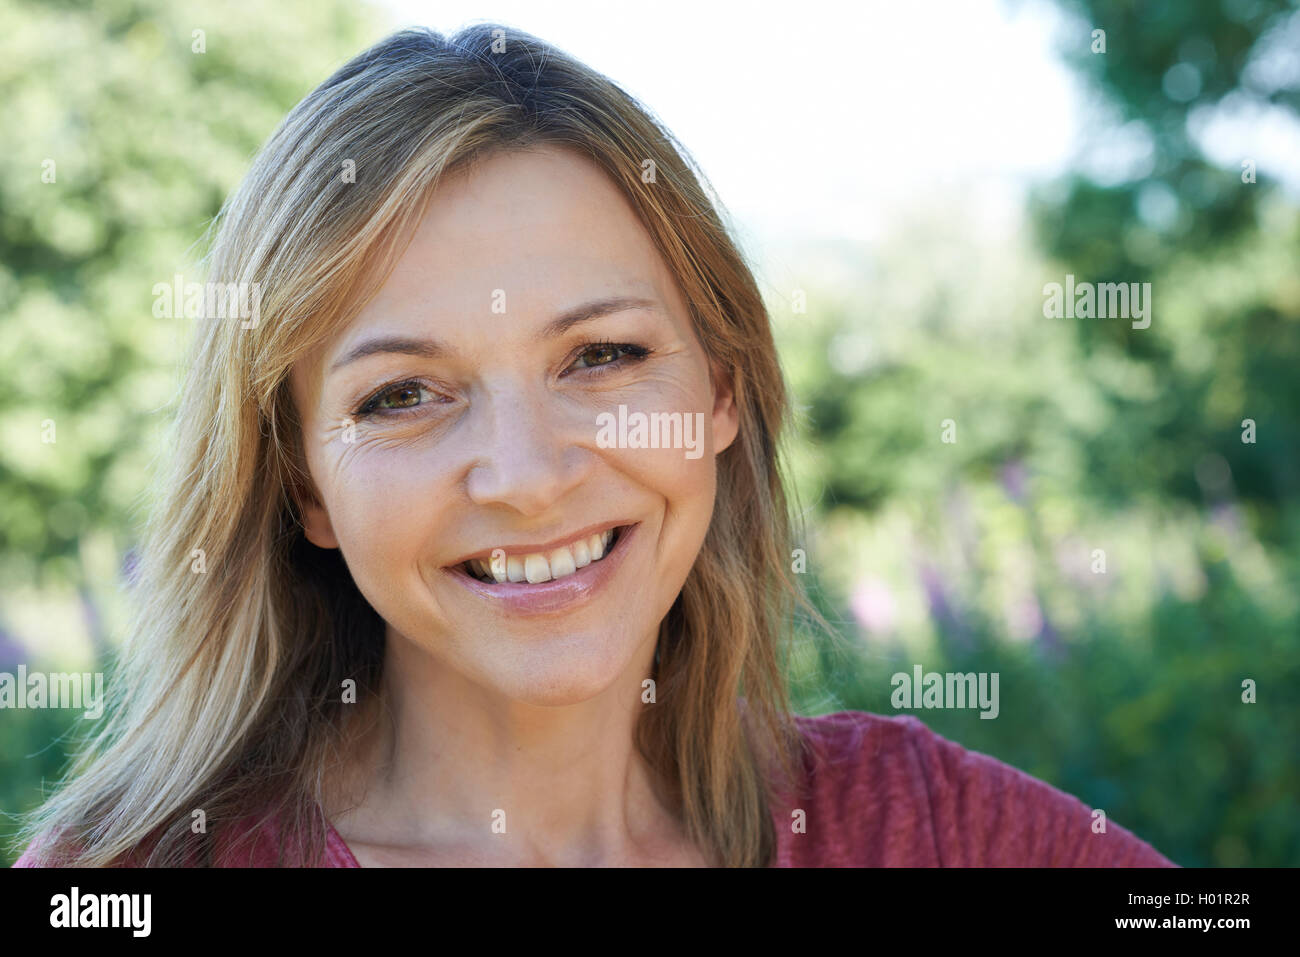 Outdoor Head And Shoulders Portrait Of Smiling Mature Woman Stock Photo